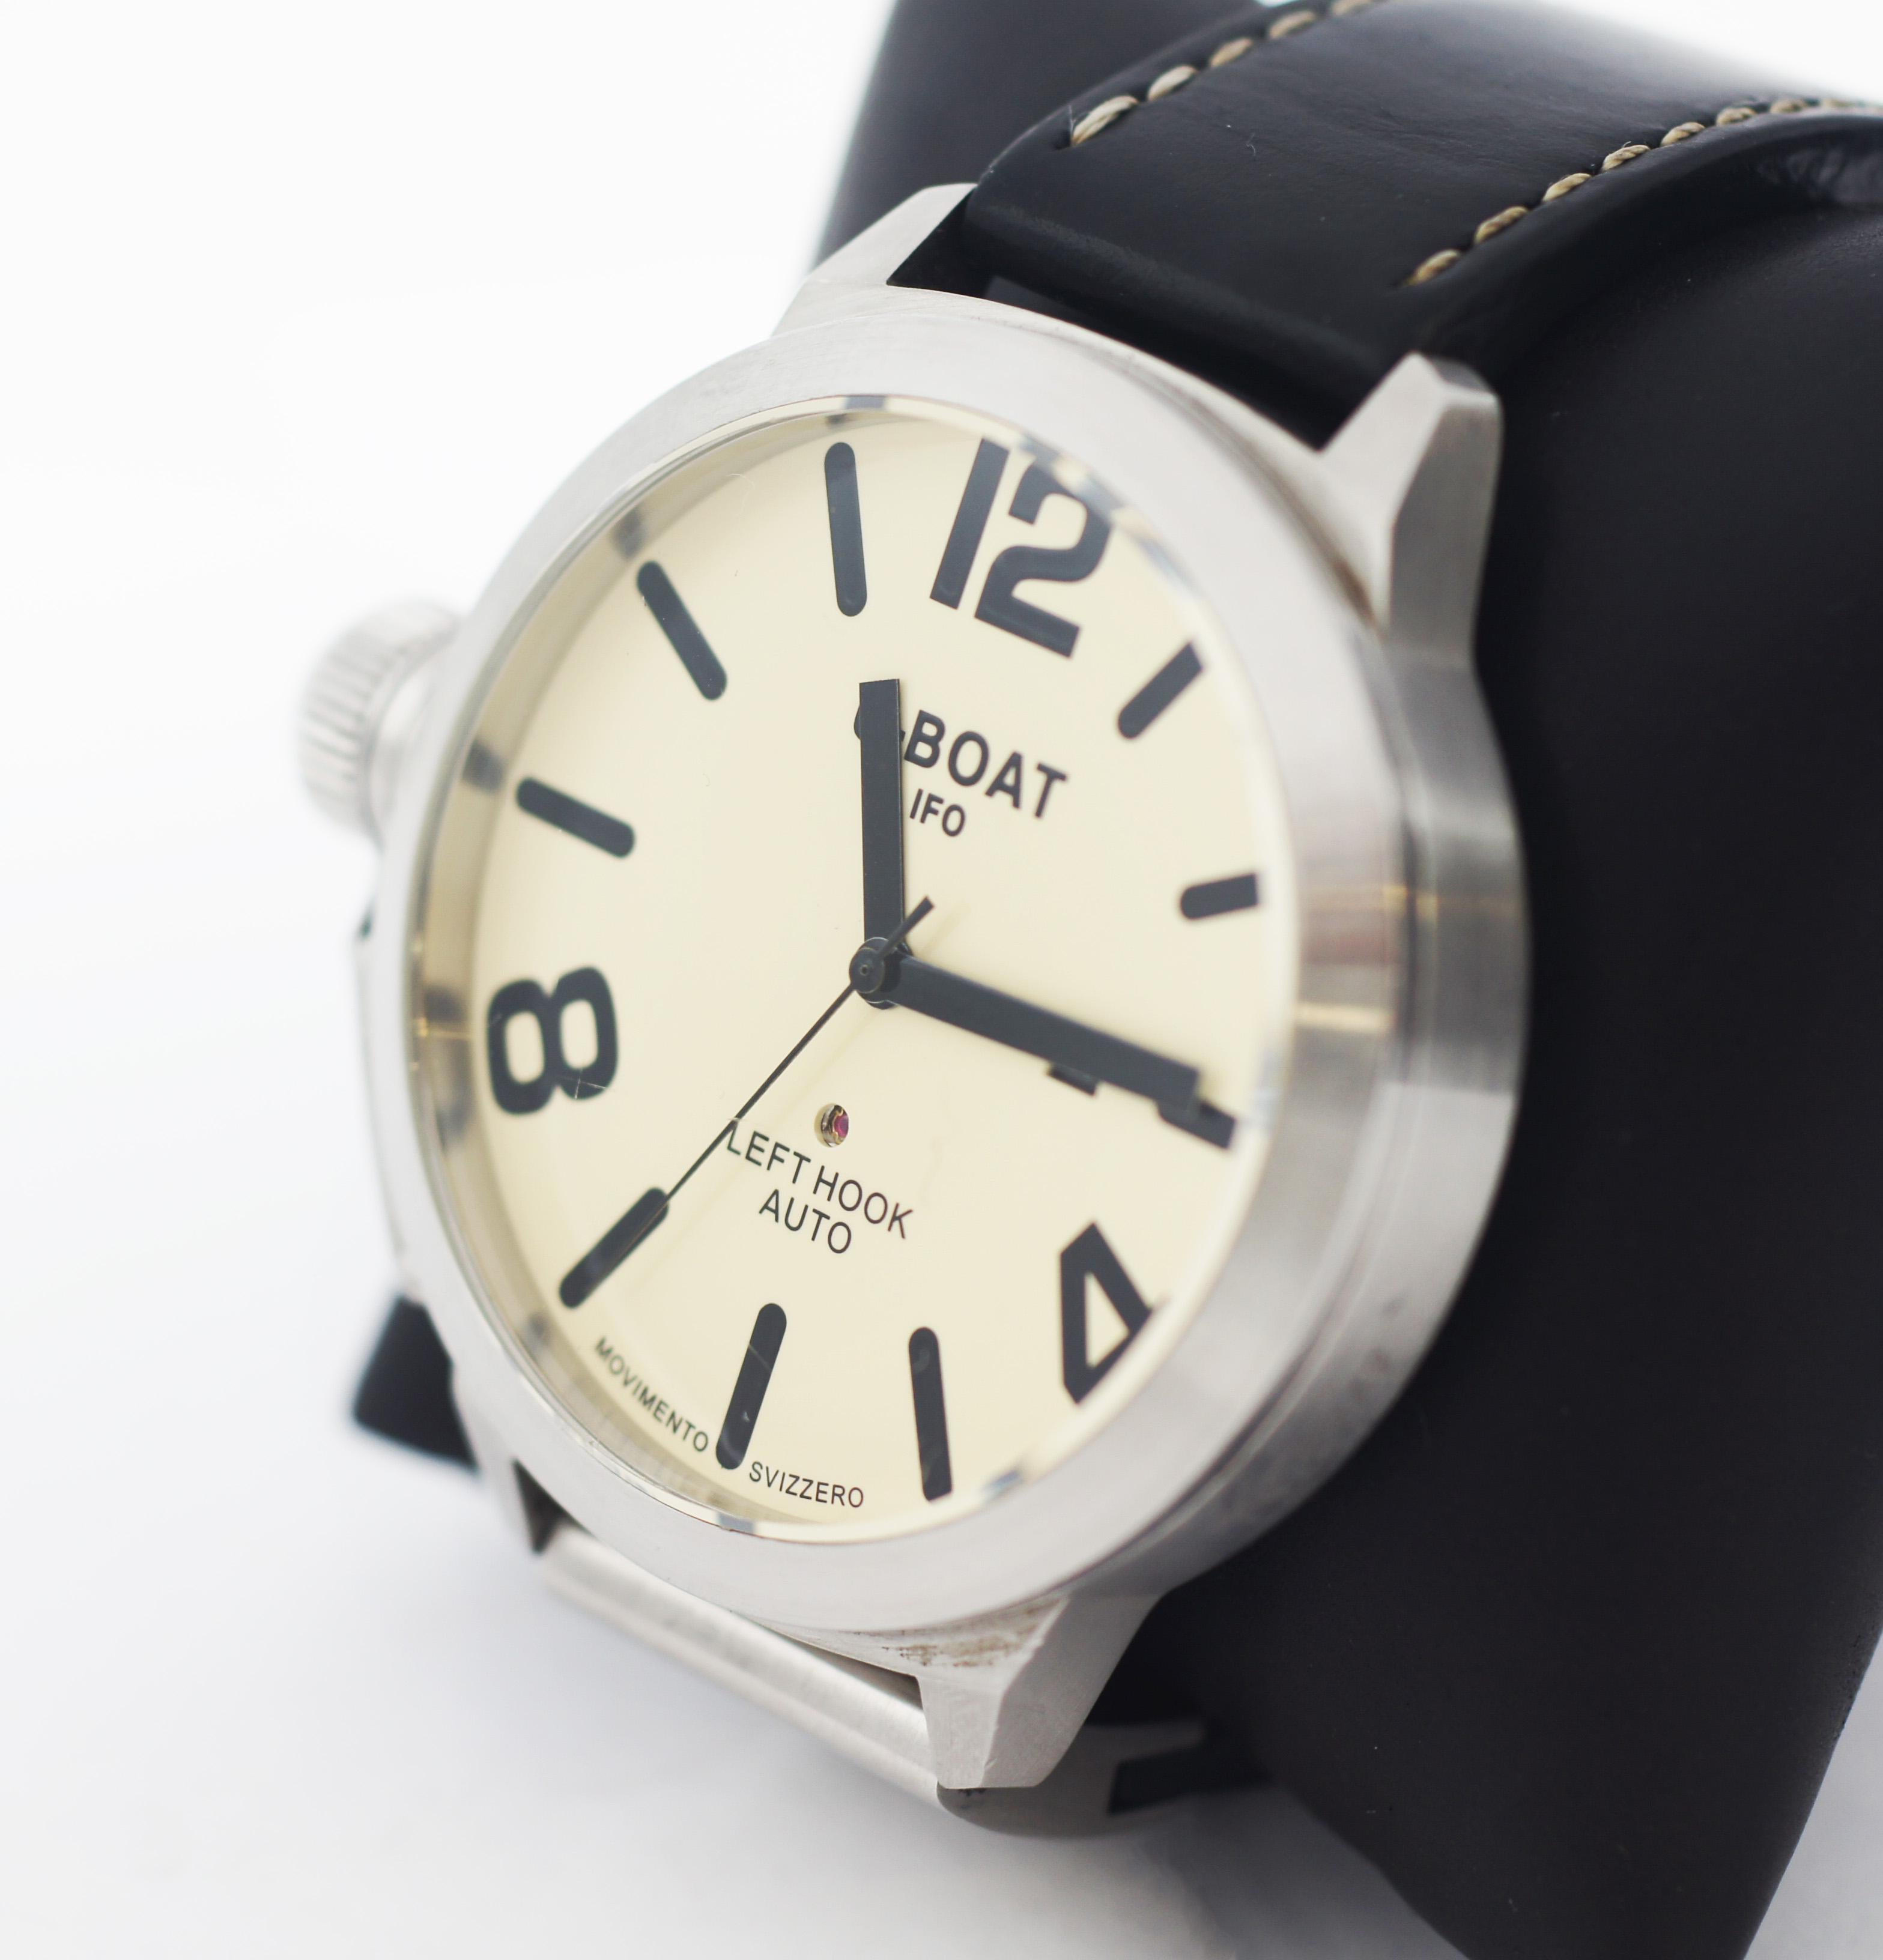 U-BOAT IFO Left Hook Classico 45mm 
U-BOAT watch Made in Italy
Automatic mechanical, modified and personalized at U-BOAT specifications with 25 jewels
Swiss made
Beige dial with Black markers and numbers 
Black hour, minute and second hands 
Small